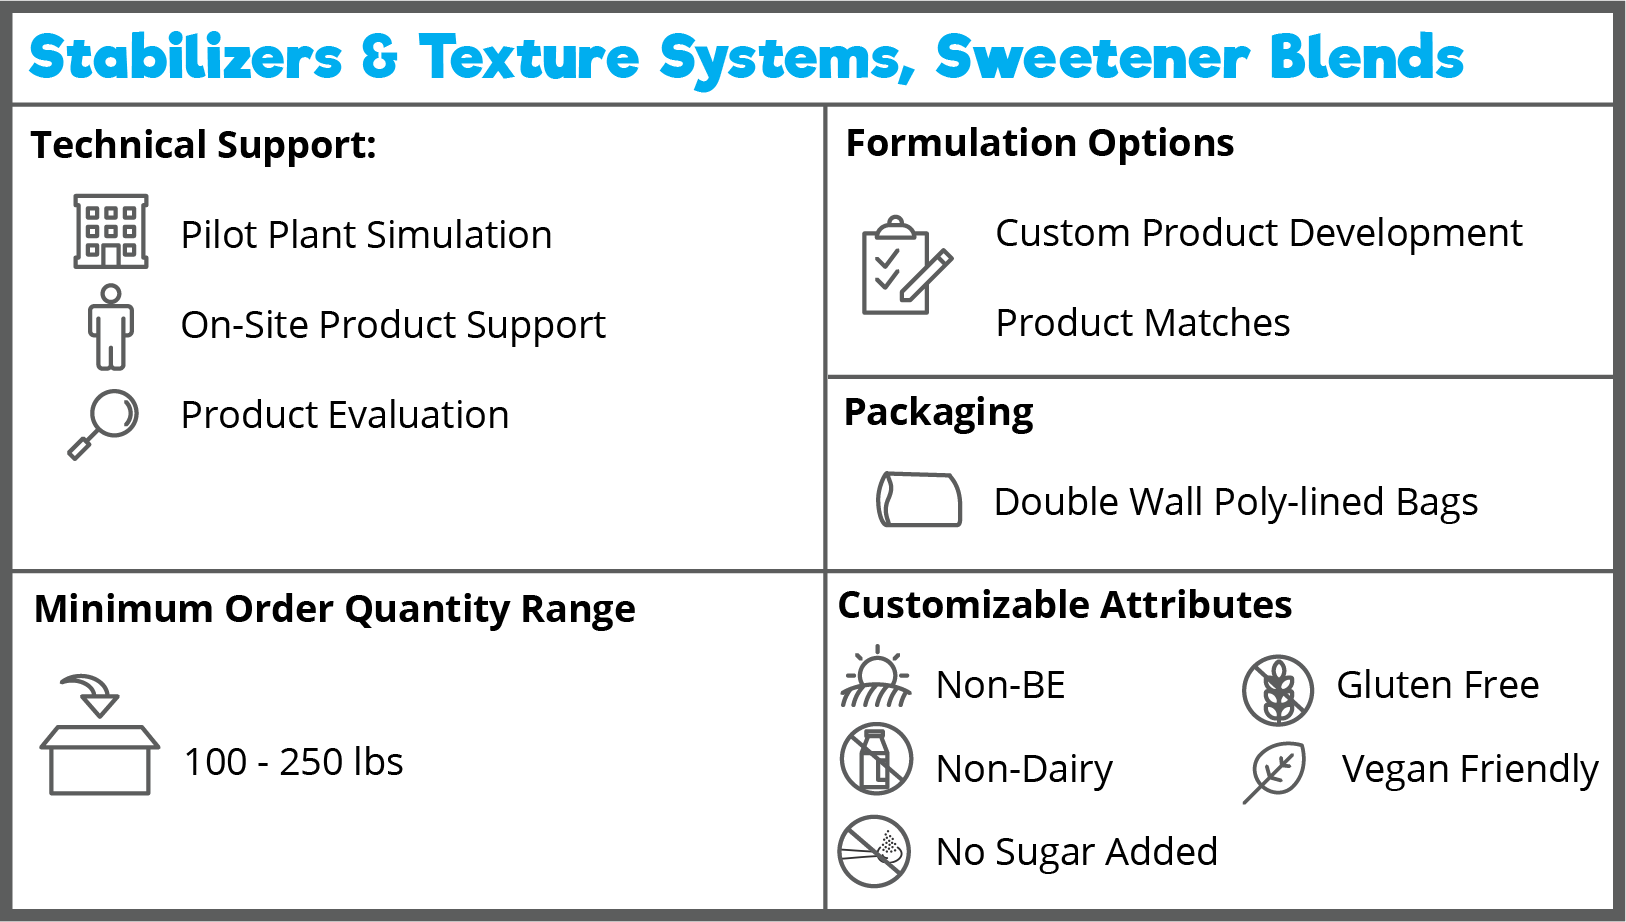 describes packaging options and attributes for denali stabilizer and texture systems